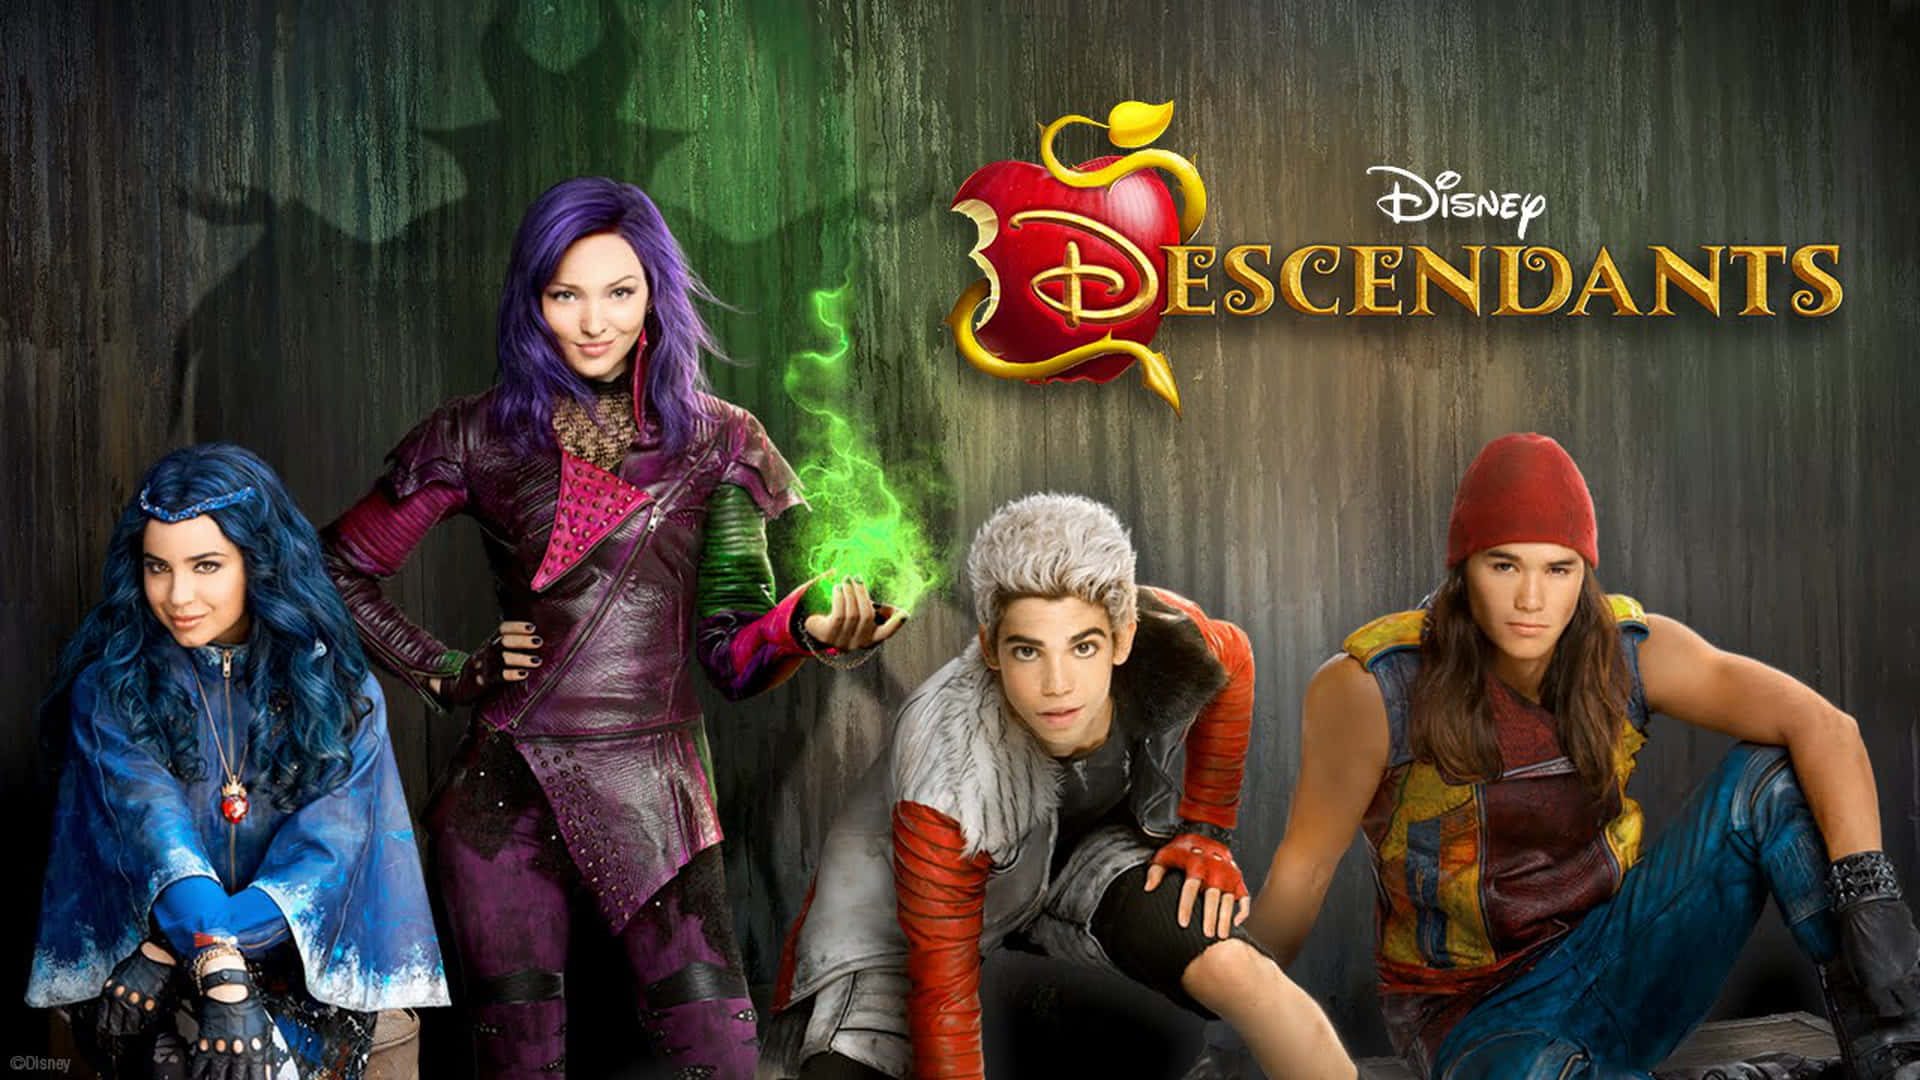 Descendants movie characters in an enchanting background